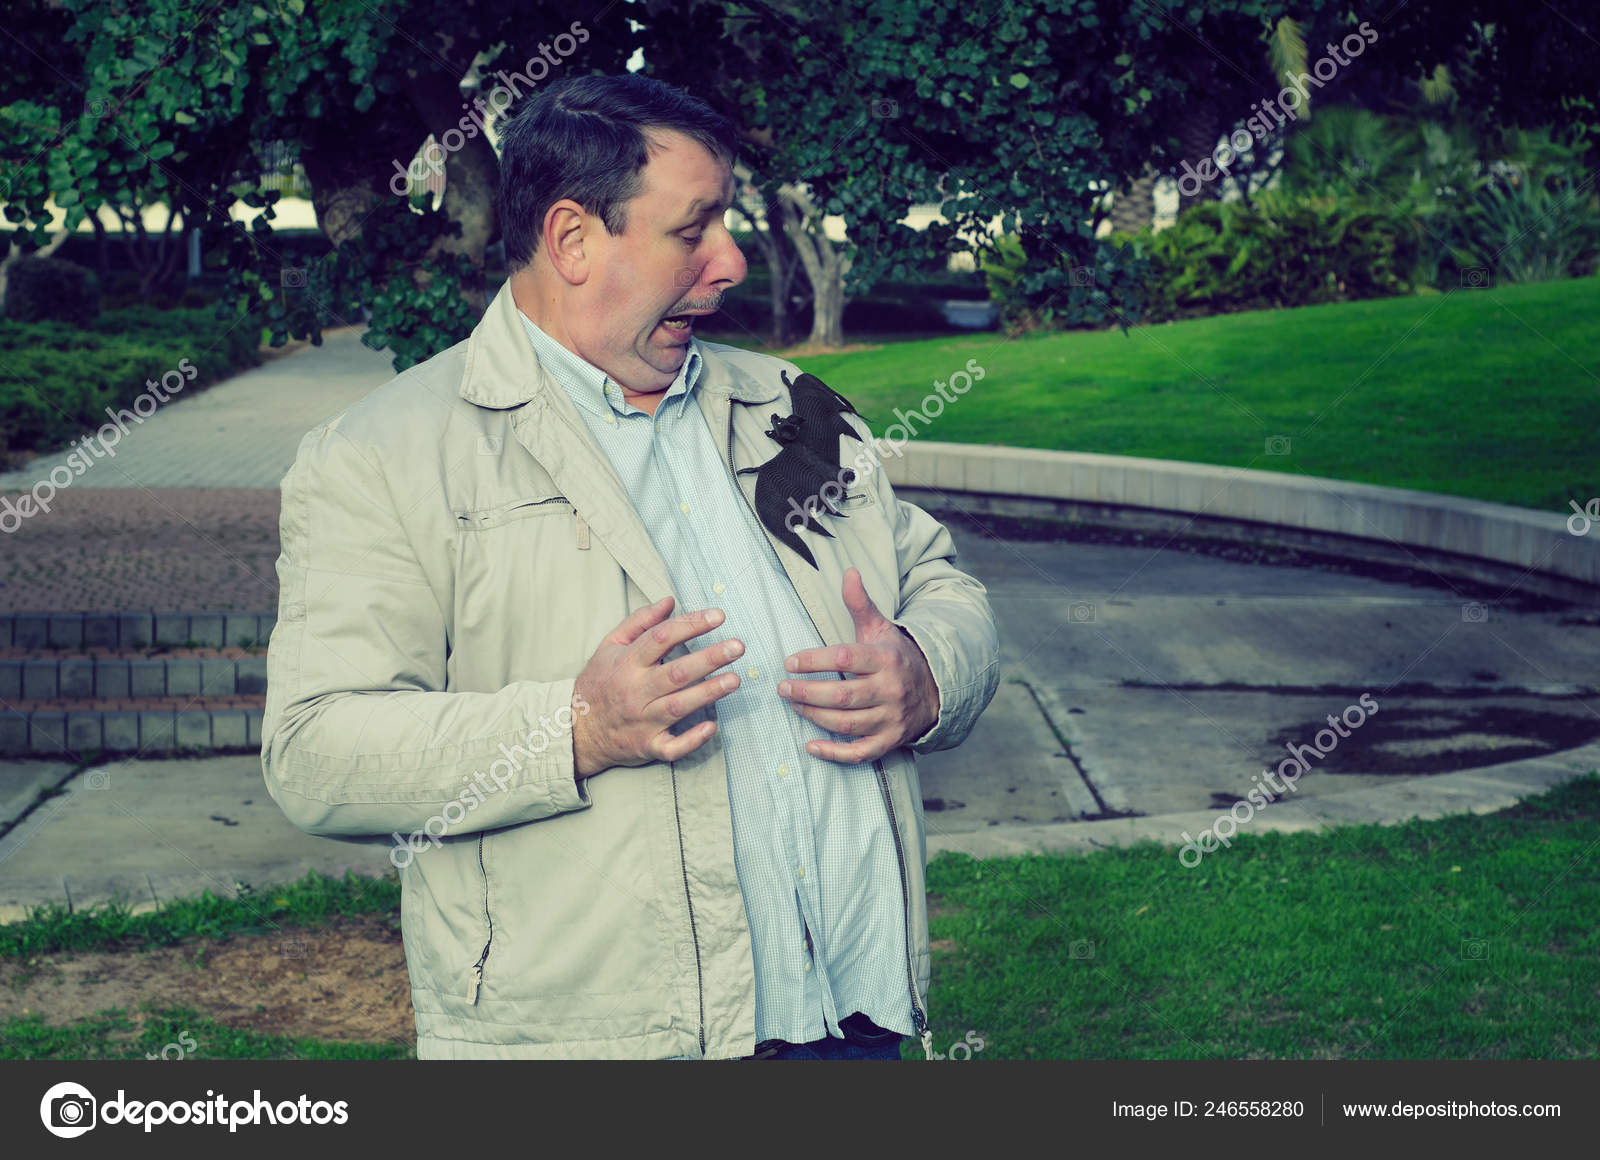 Mature man is very scared because big bat has landed on his jacket